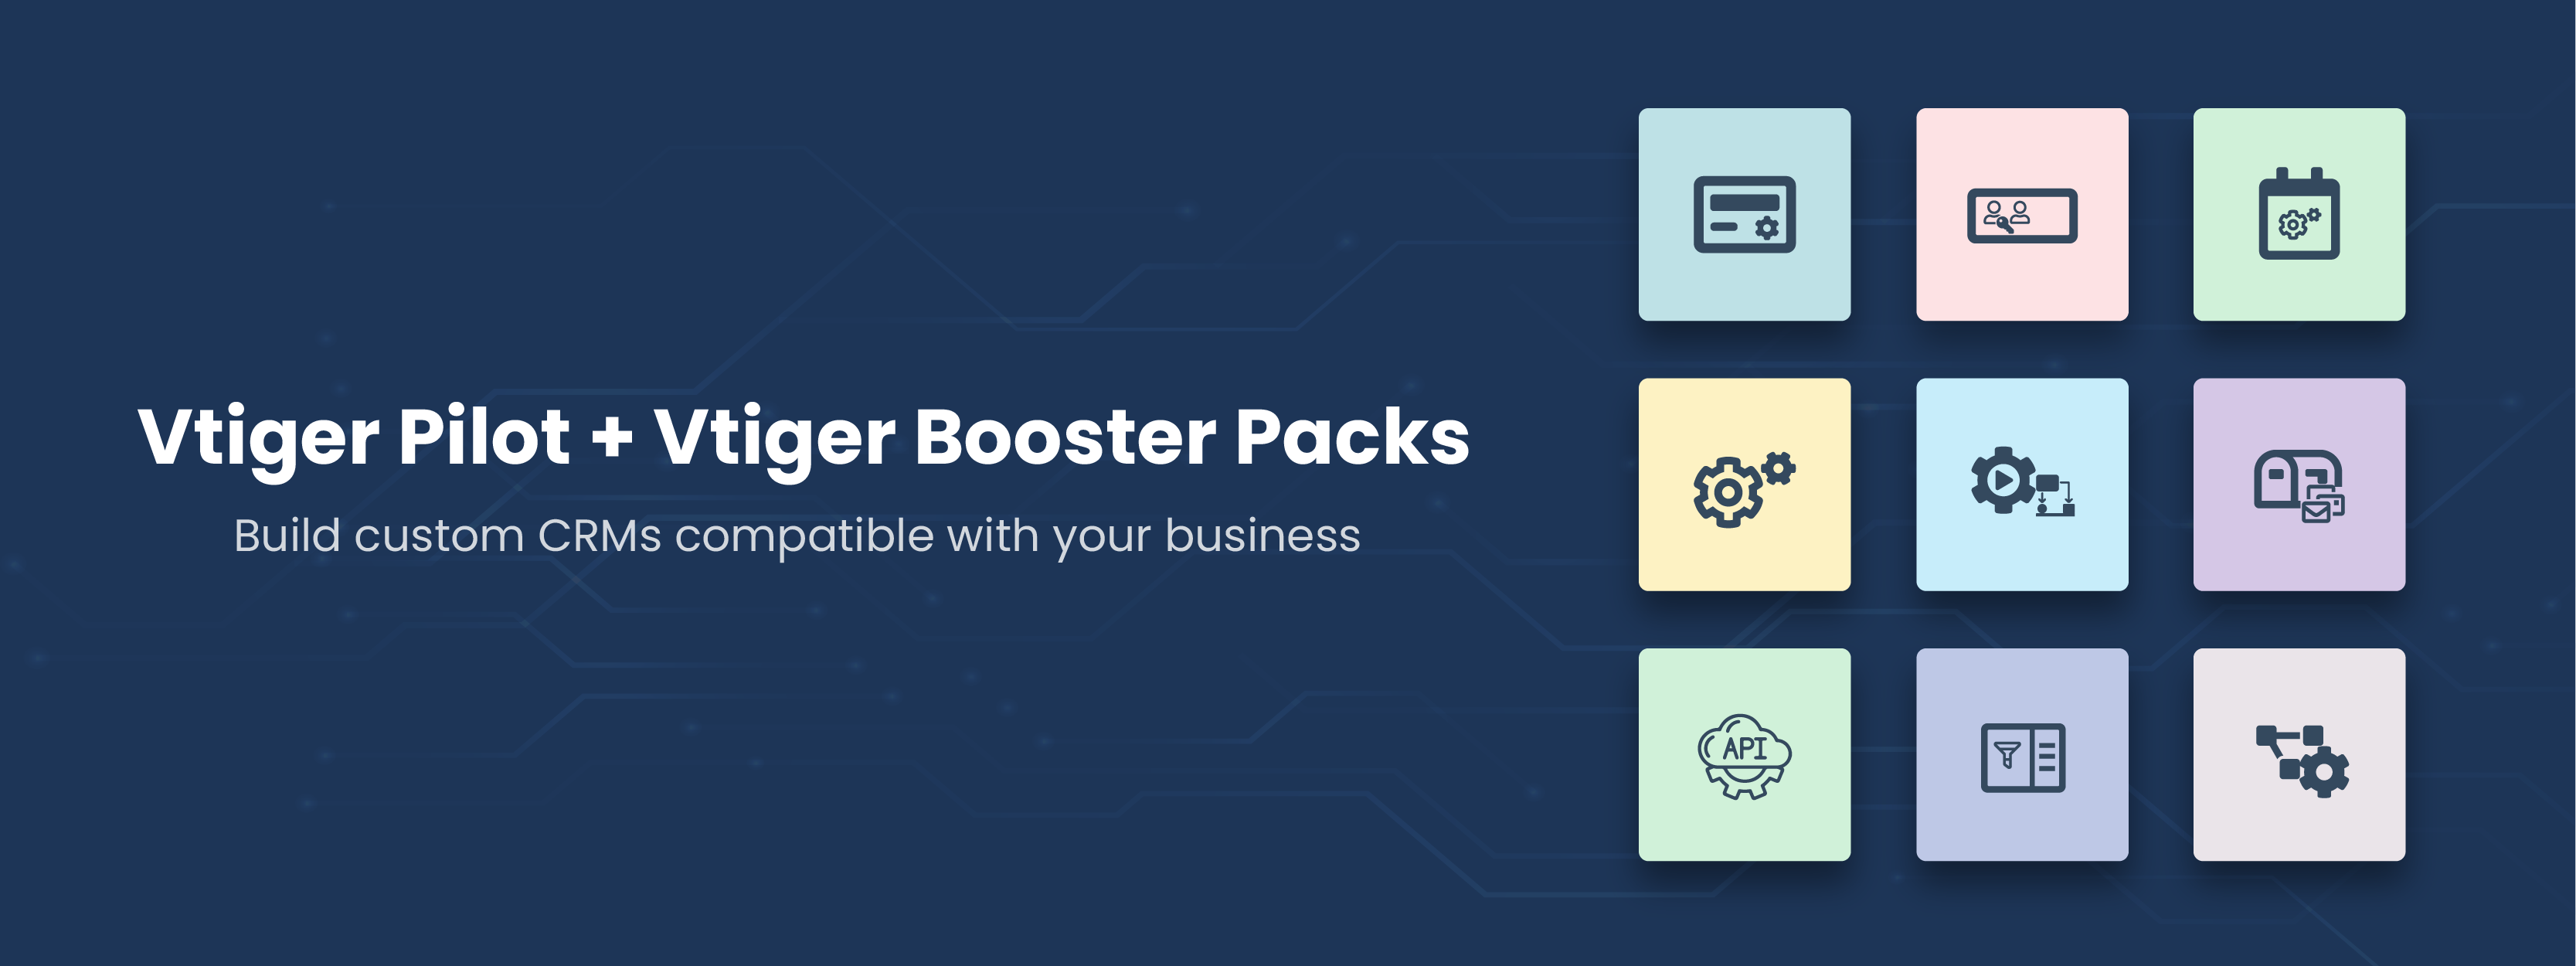 Booster pack blog 2 - Immagine banner